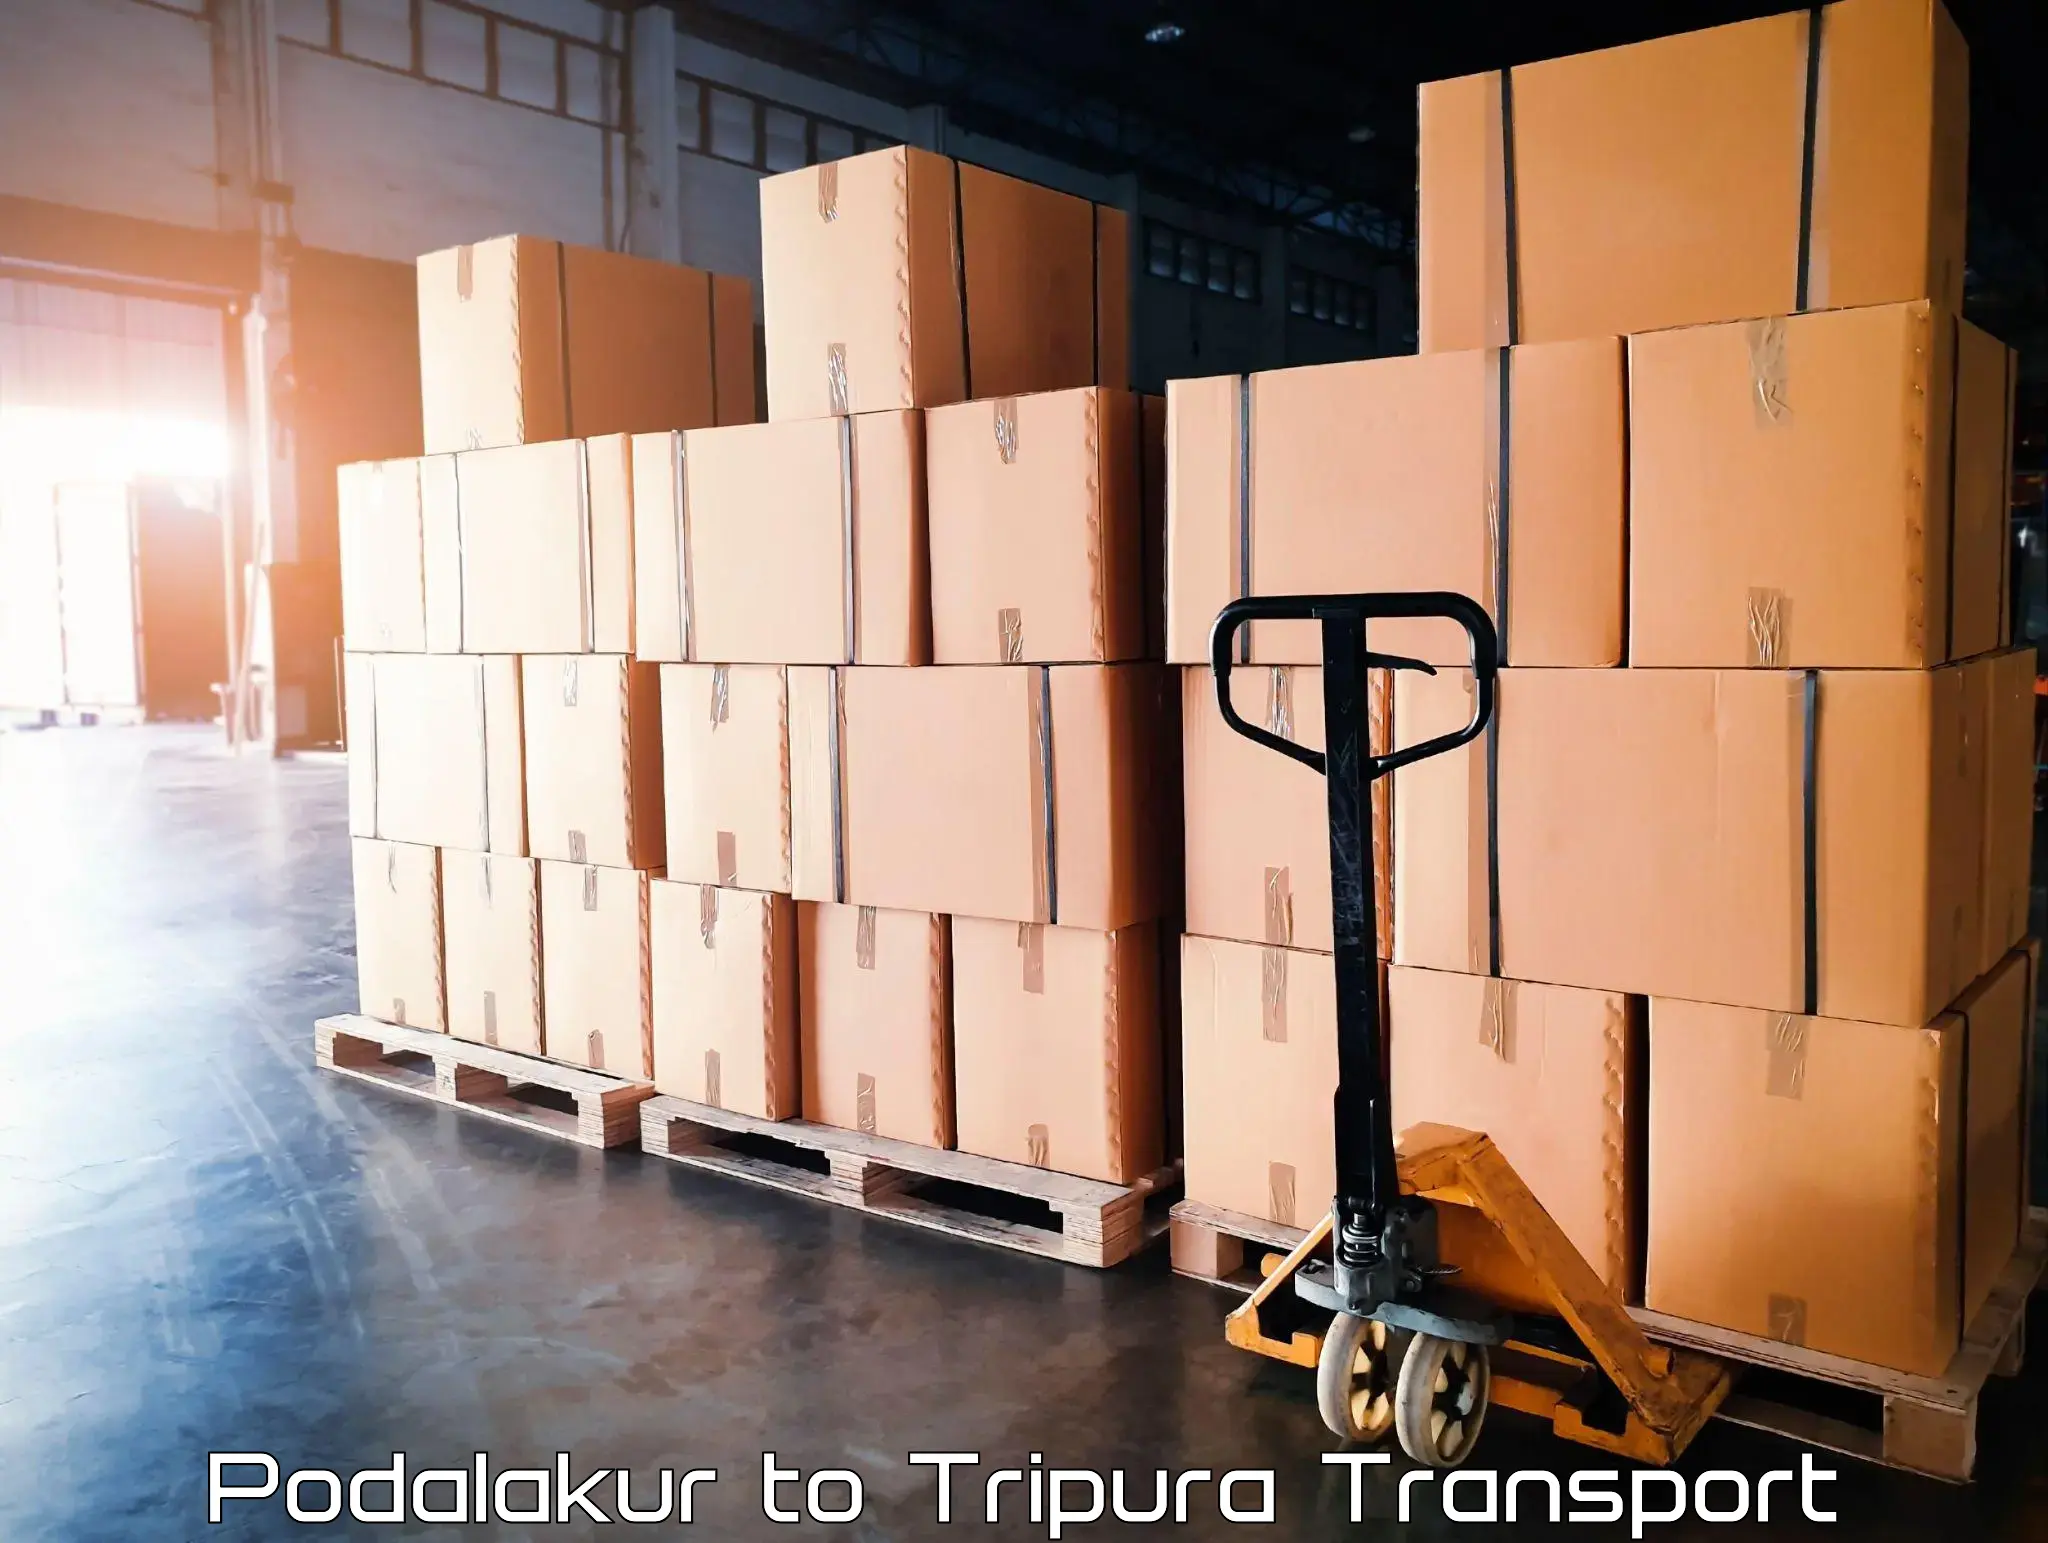 Online transport service in Podalakur to Udaipur Tripura